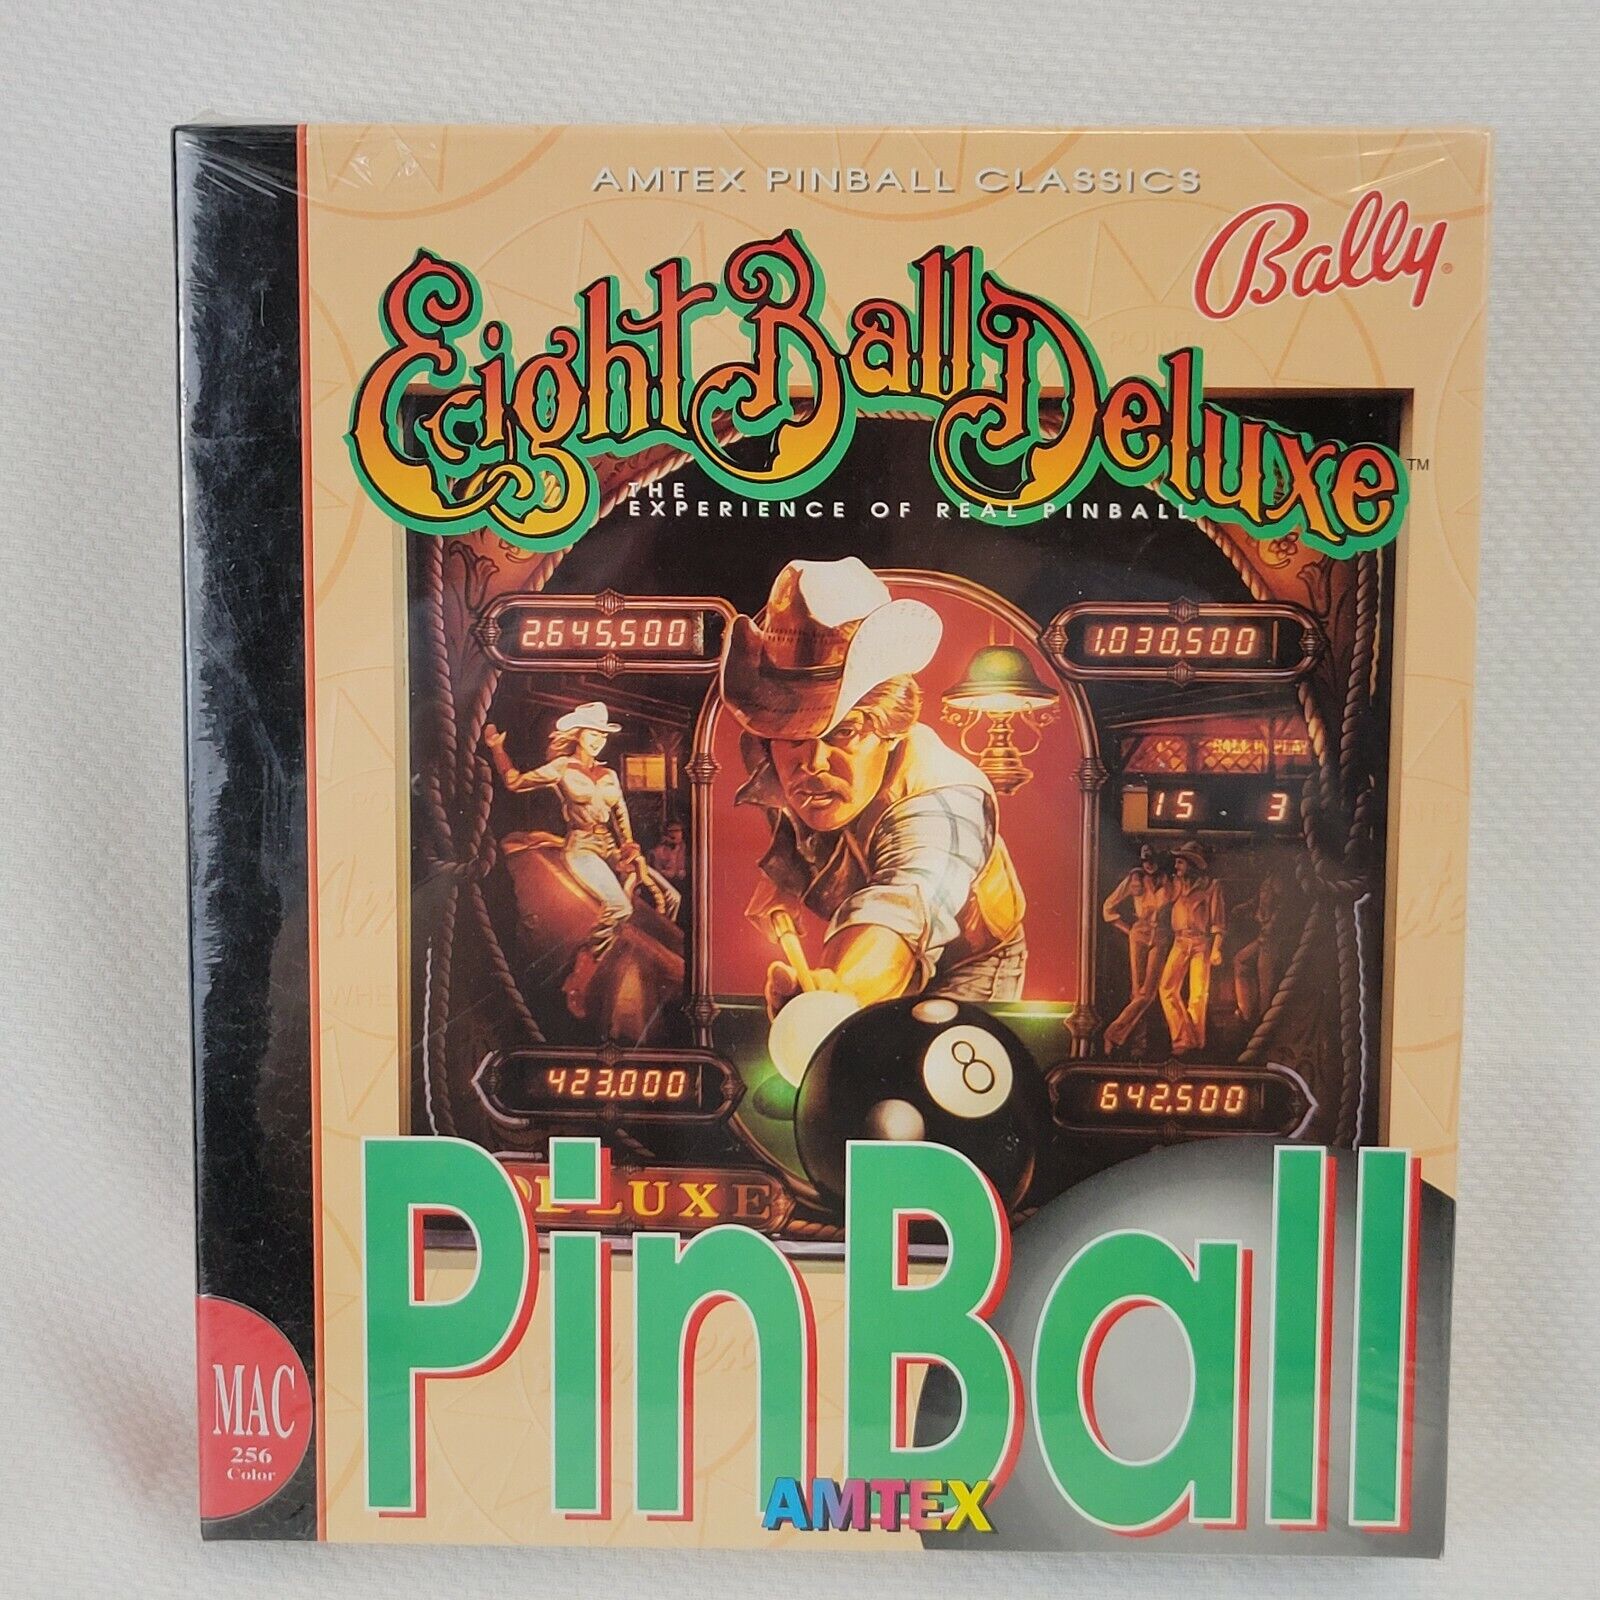 SEALED Bally Eight Ball Deluxe Pinball Game Amtex, MAC Apple Computer VINTAGE